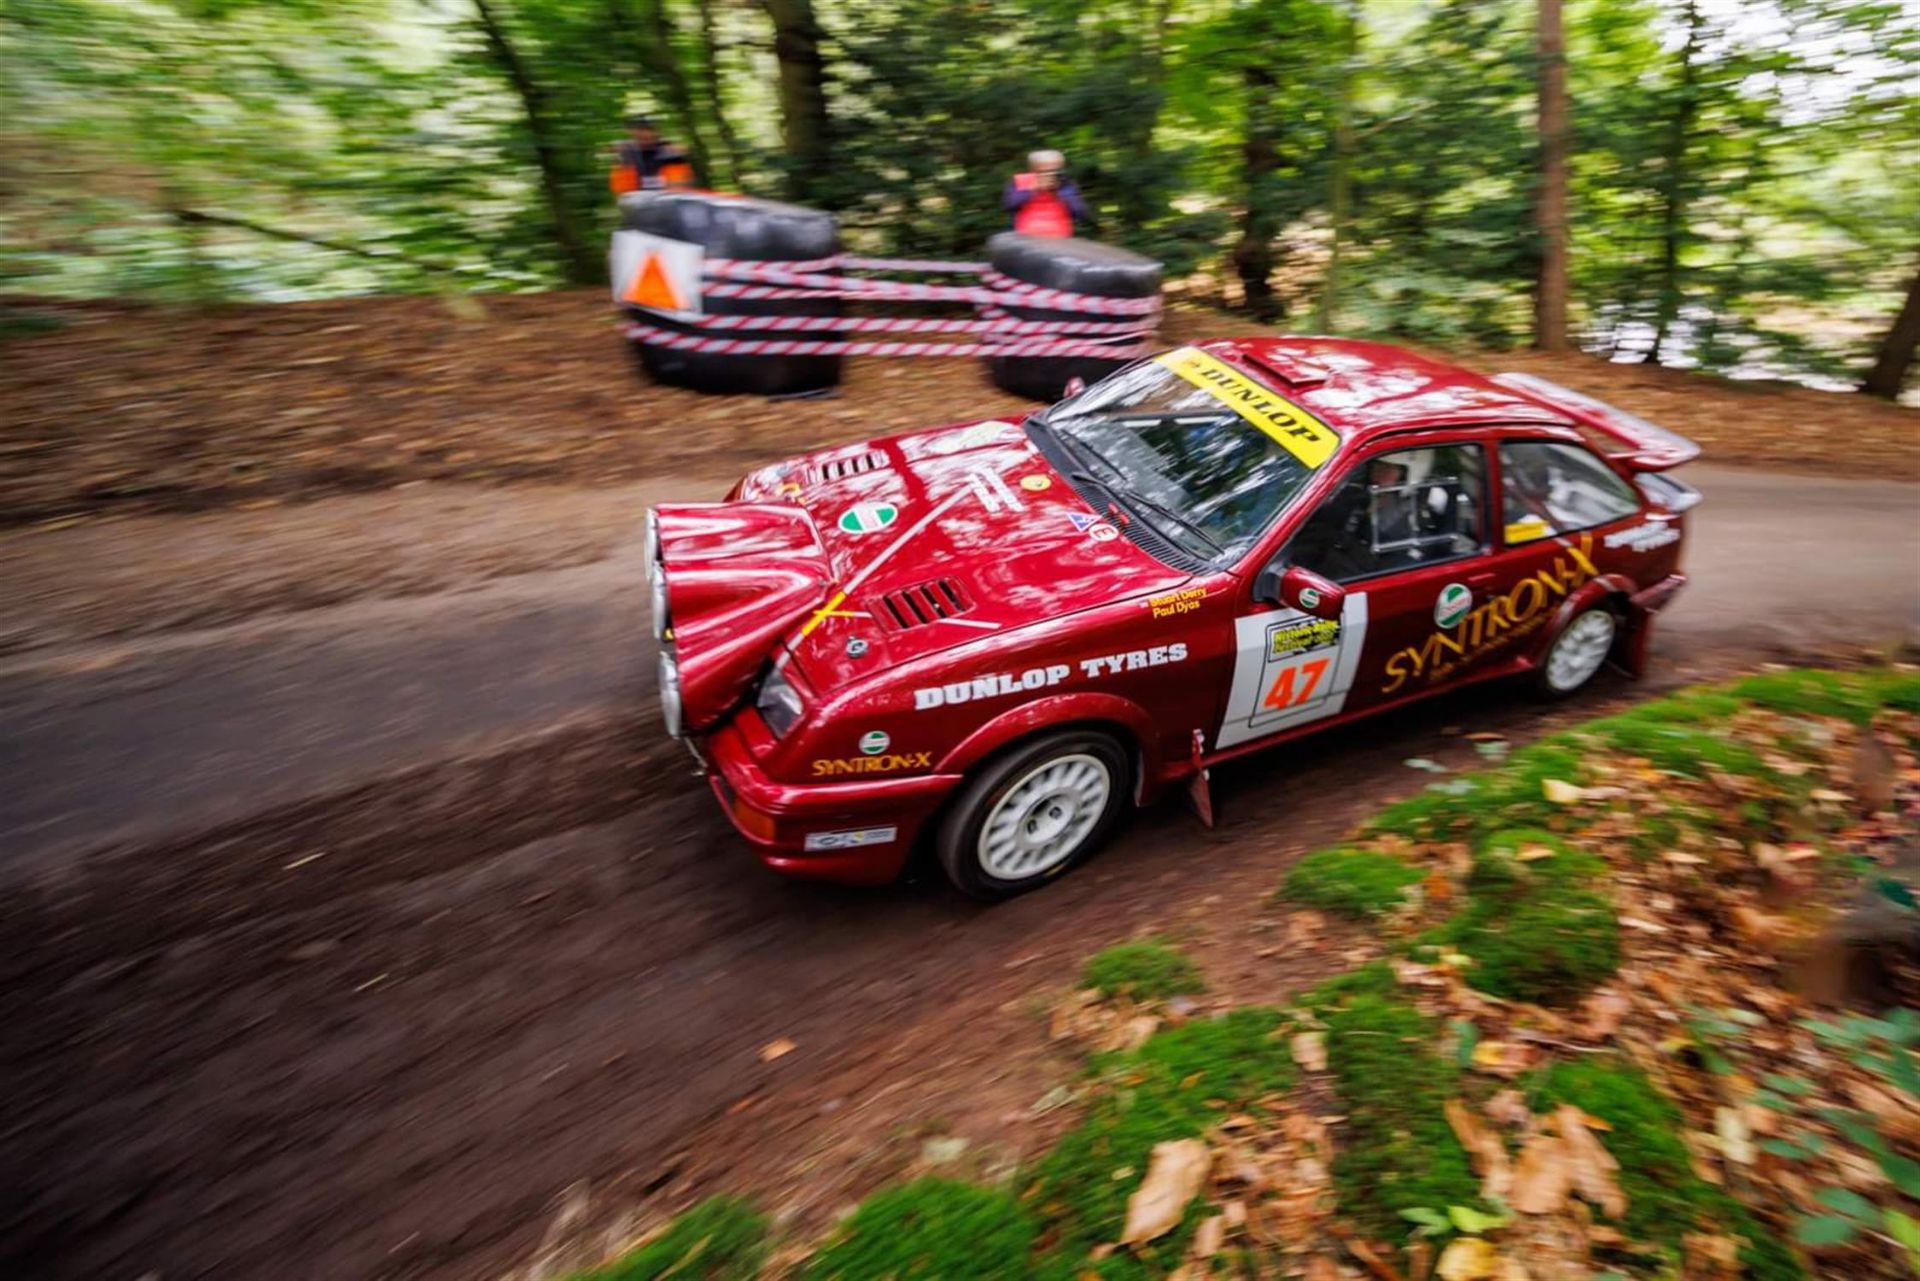 1983 Ford Sierra Rally Car Powered by Cosworth - Image 7 of 10